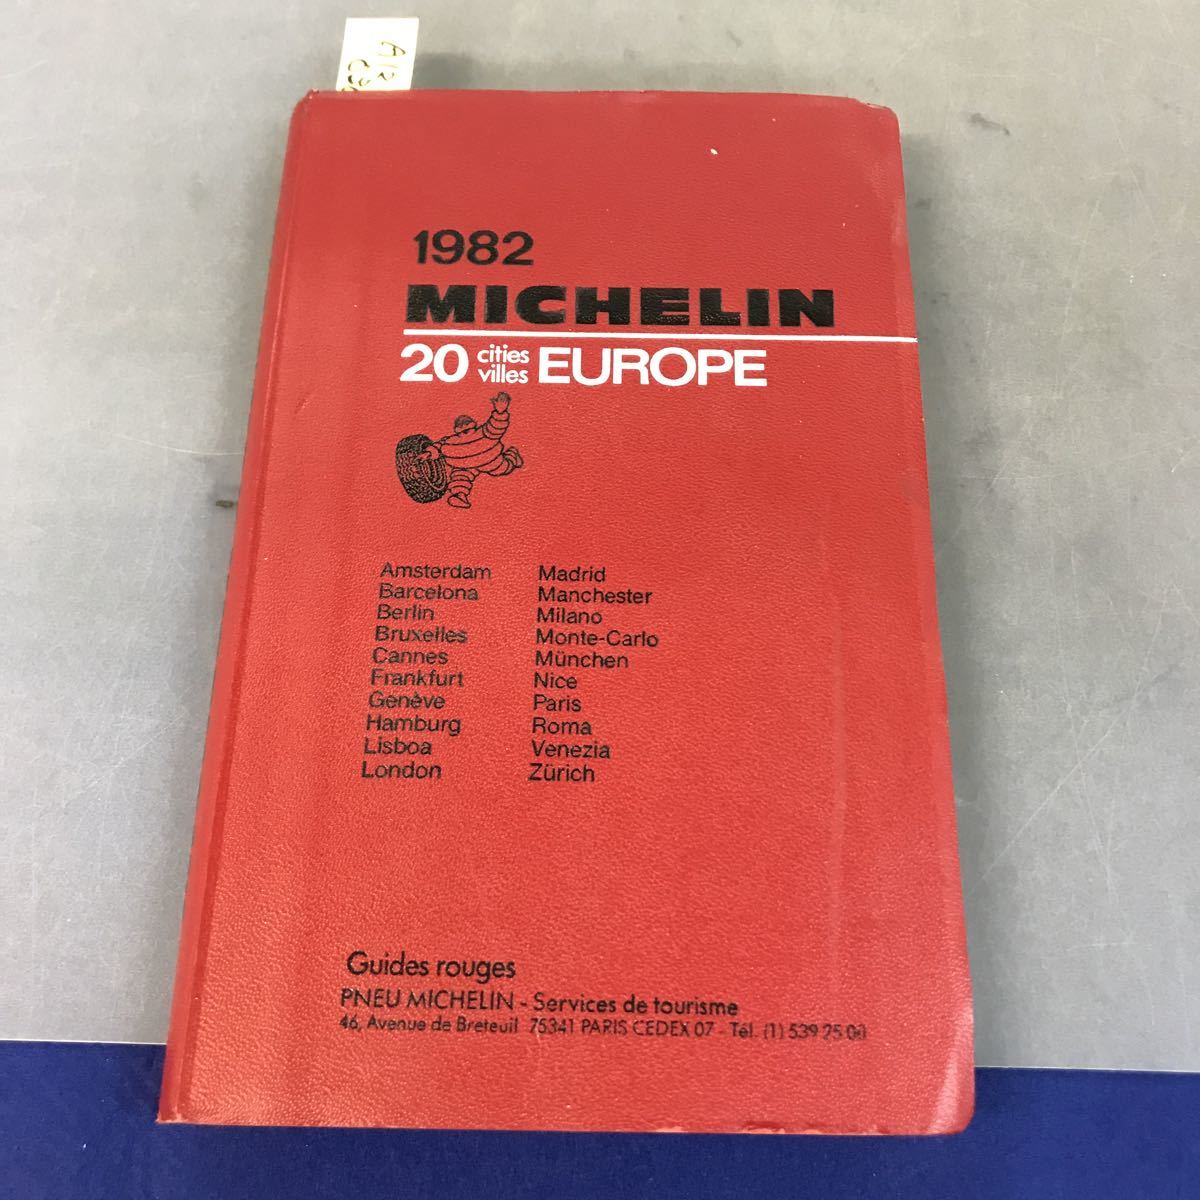 A12-030 MICHELIN20 cities villes EUROPE 1982 記名塗りつぶし有り シール貼り有り